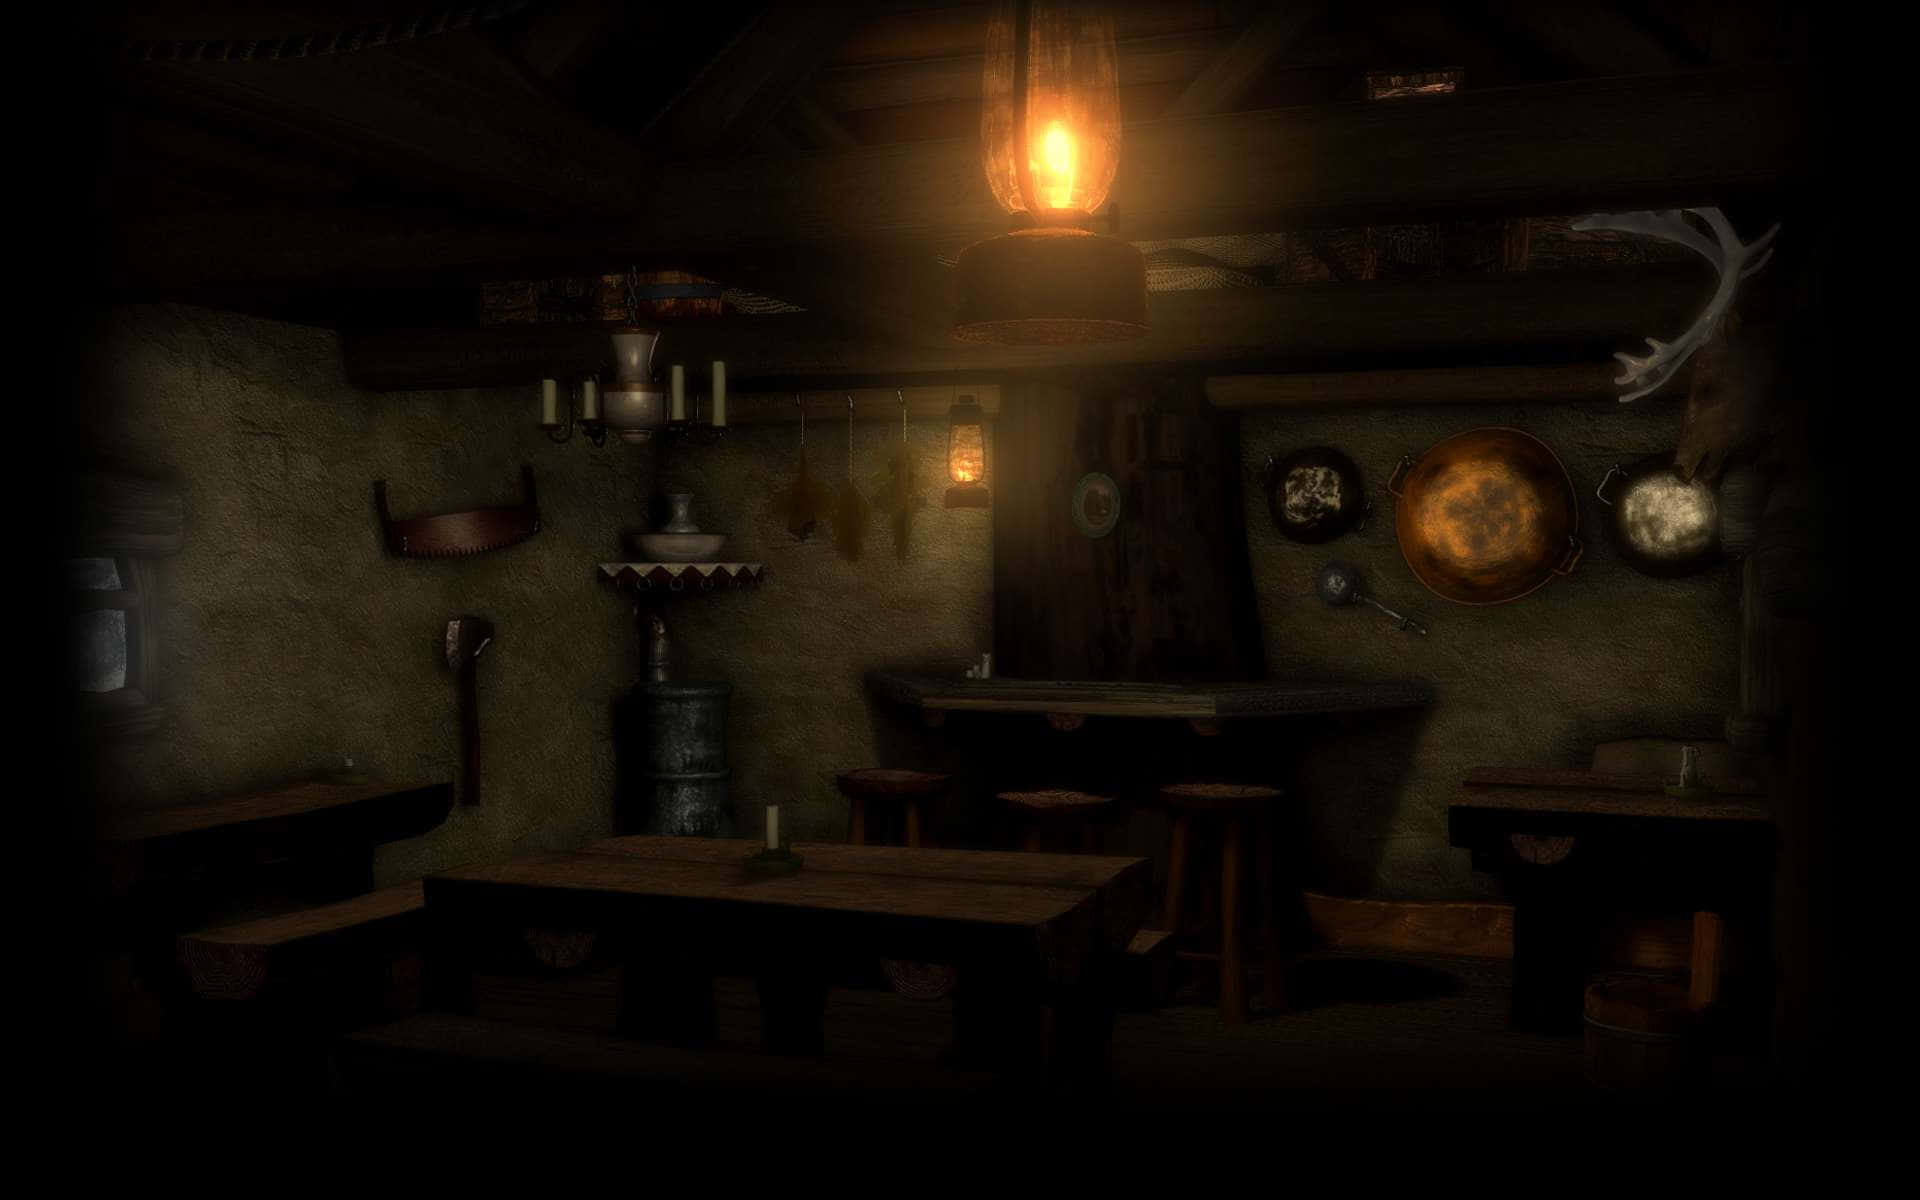 Enjoy a Night out at the Tavern